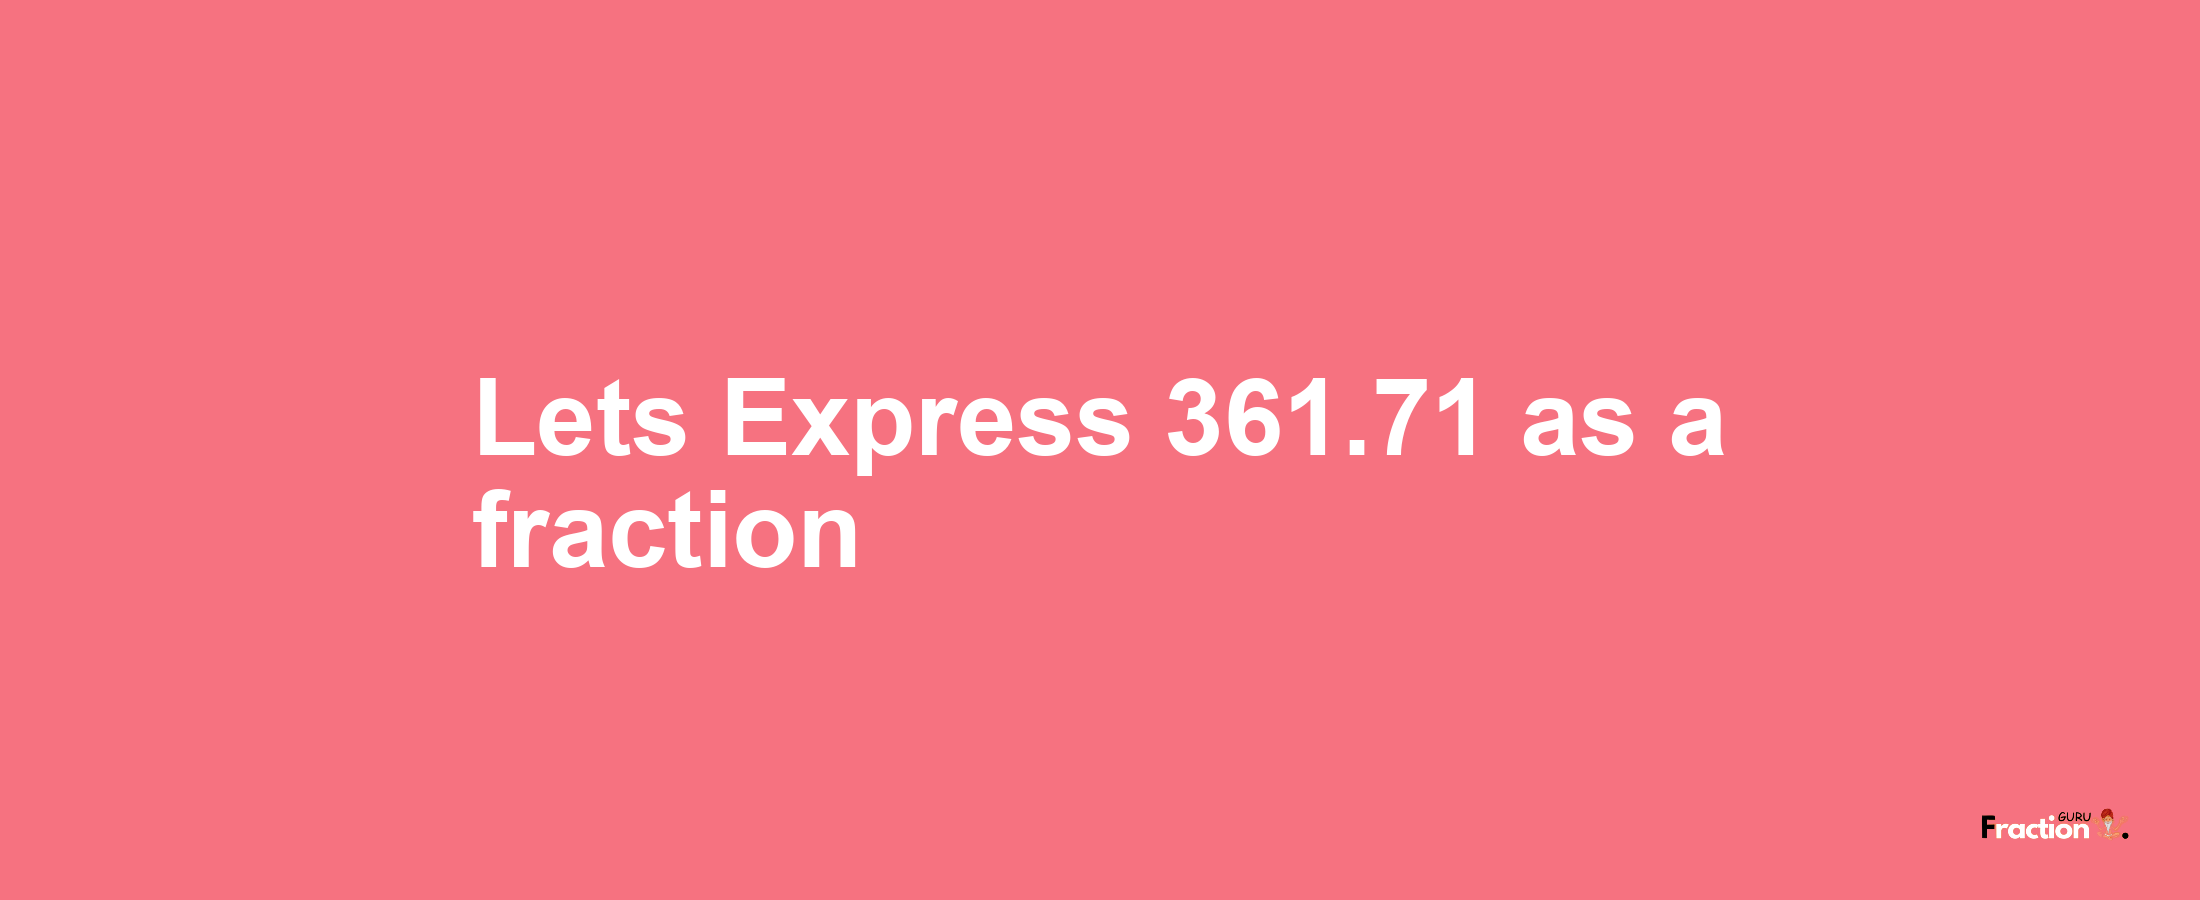 Lets Express 361.71 as afraction